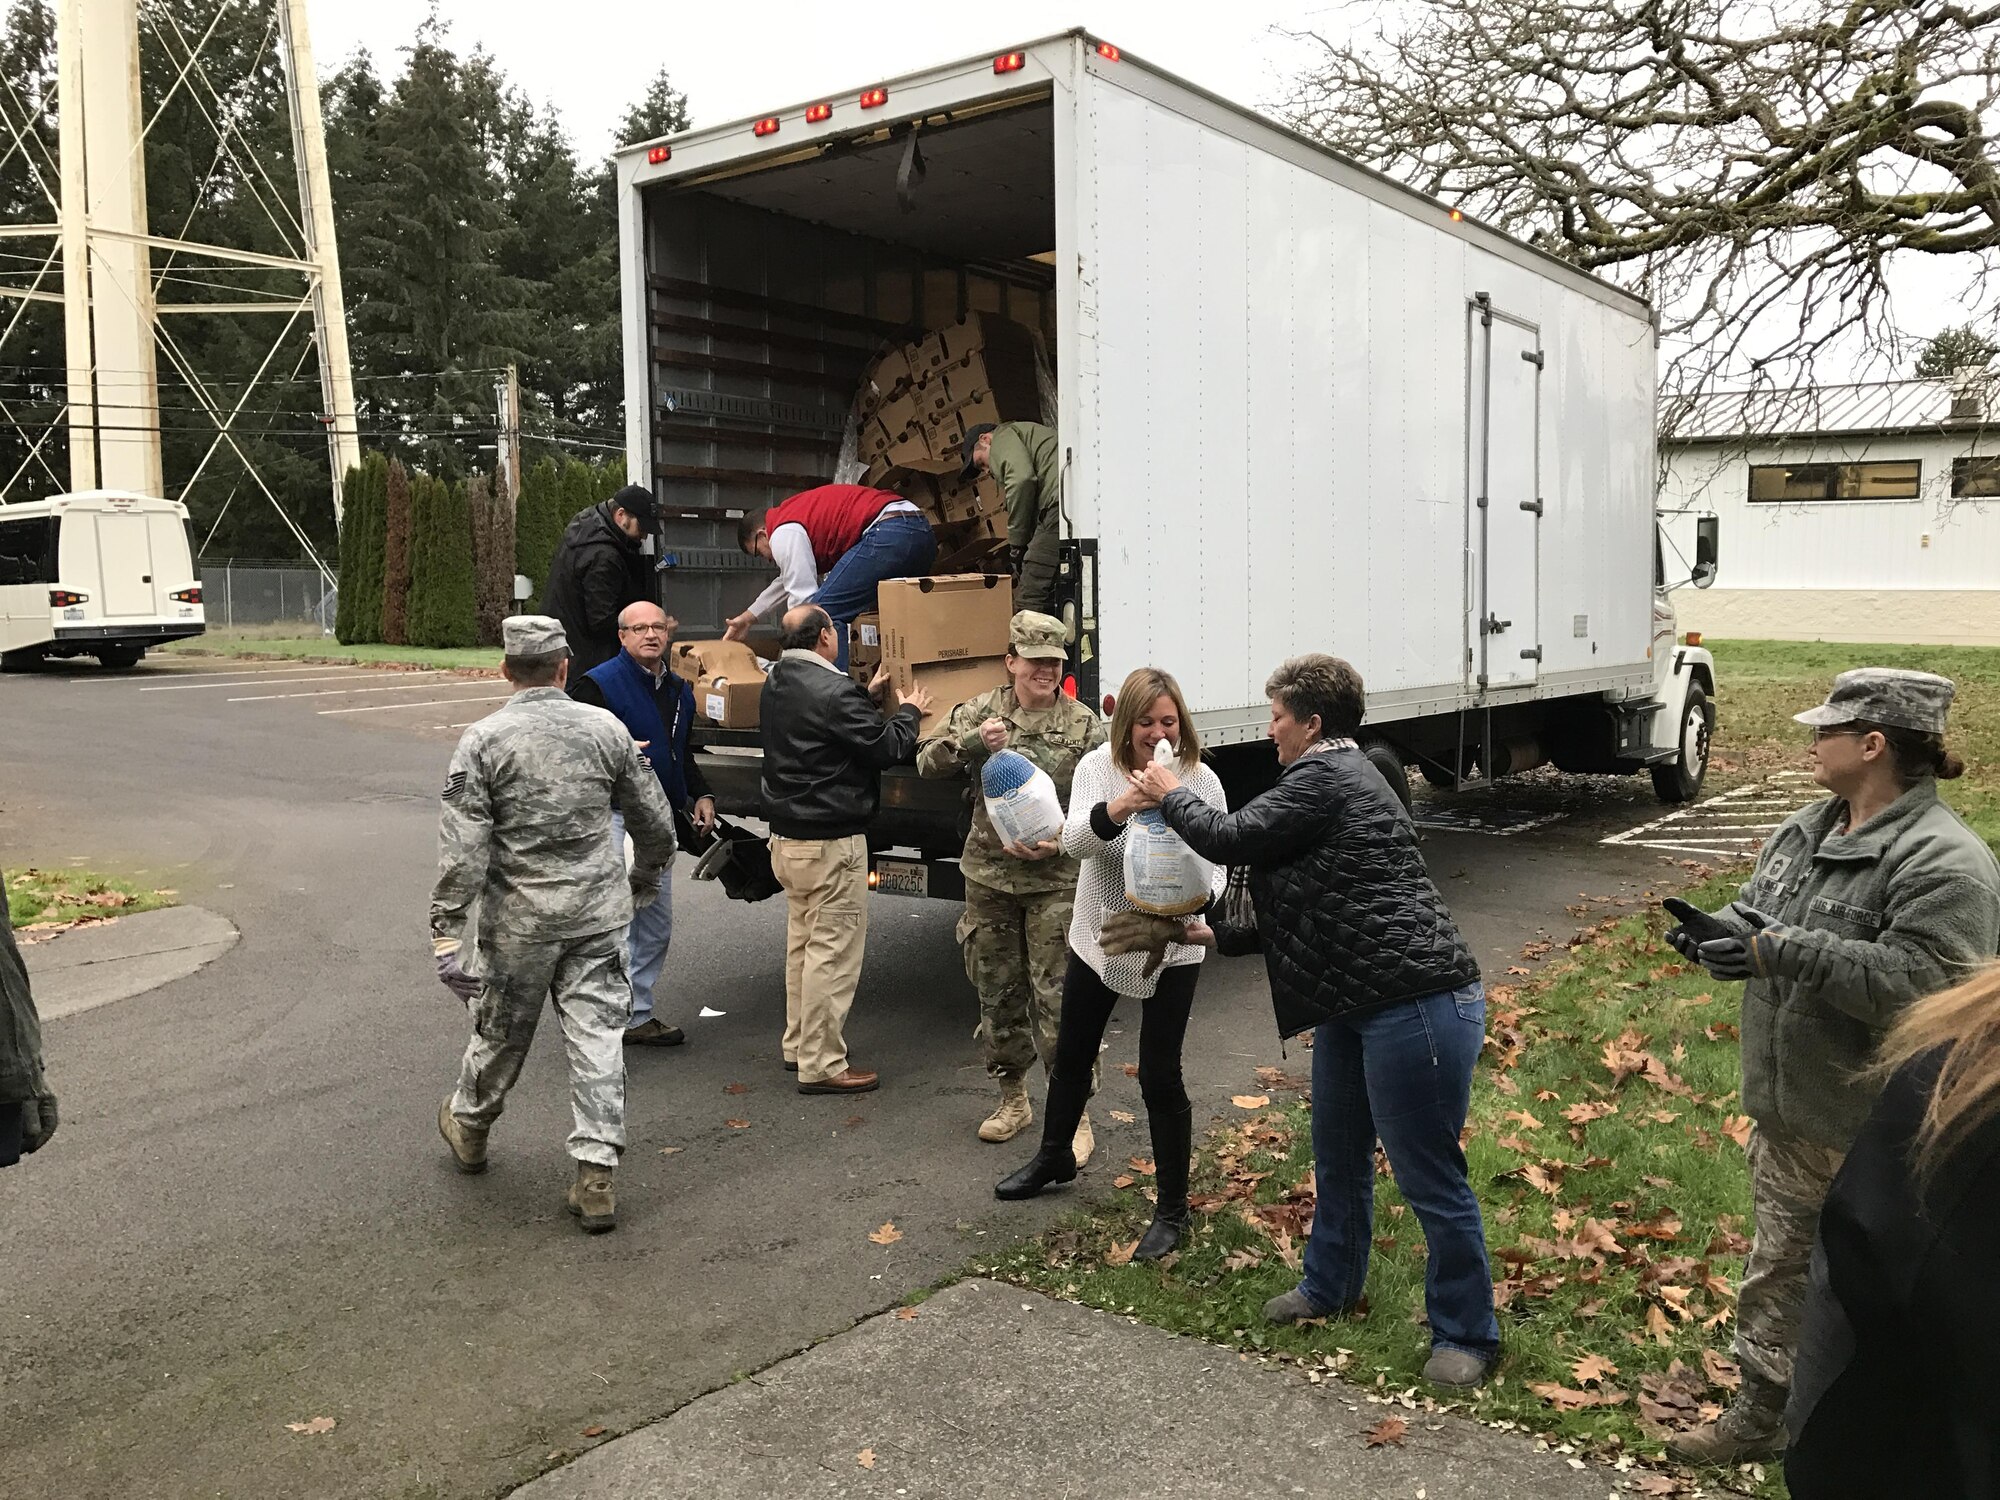 Volunteers and Airmen from the 446th Airlift Wing's Airman and Family Readiness Center help unload turkey from a truck as part of the annual Turkey drop on the Rainier Wing. The Puget Sound Business Alliance partnered with the 446th AW to donate 83 Turkeys as part of an ongoing Thanksgiving food drive effort taking place on the Rainier Wing to provide Airmen in need with a Thanksgiving meal. (U.S. Air Force photo by Staff Sgt. Daniel Liddicoet)